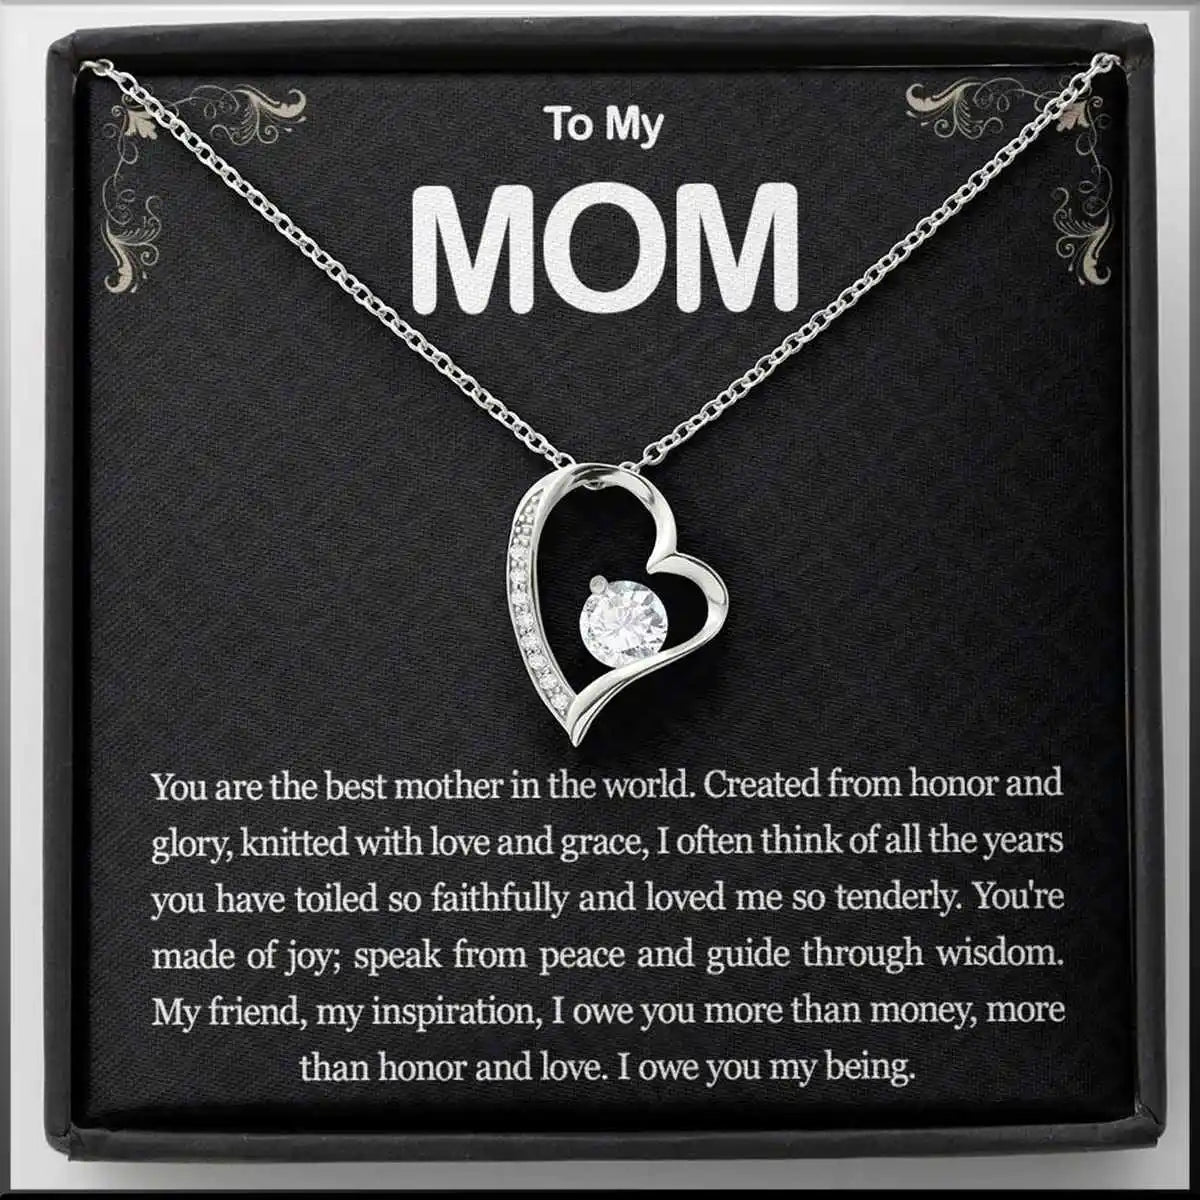 Heart Pendant Necklace with Mother's Day Gift Note for Mom